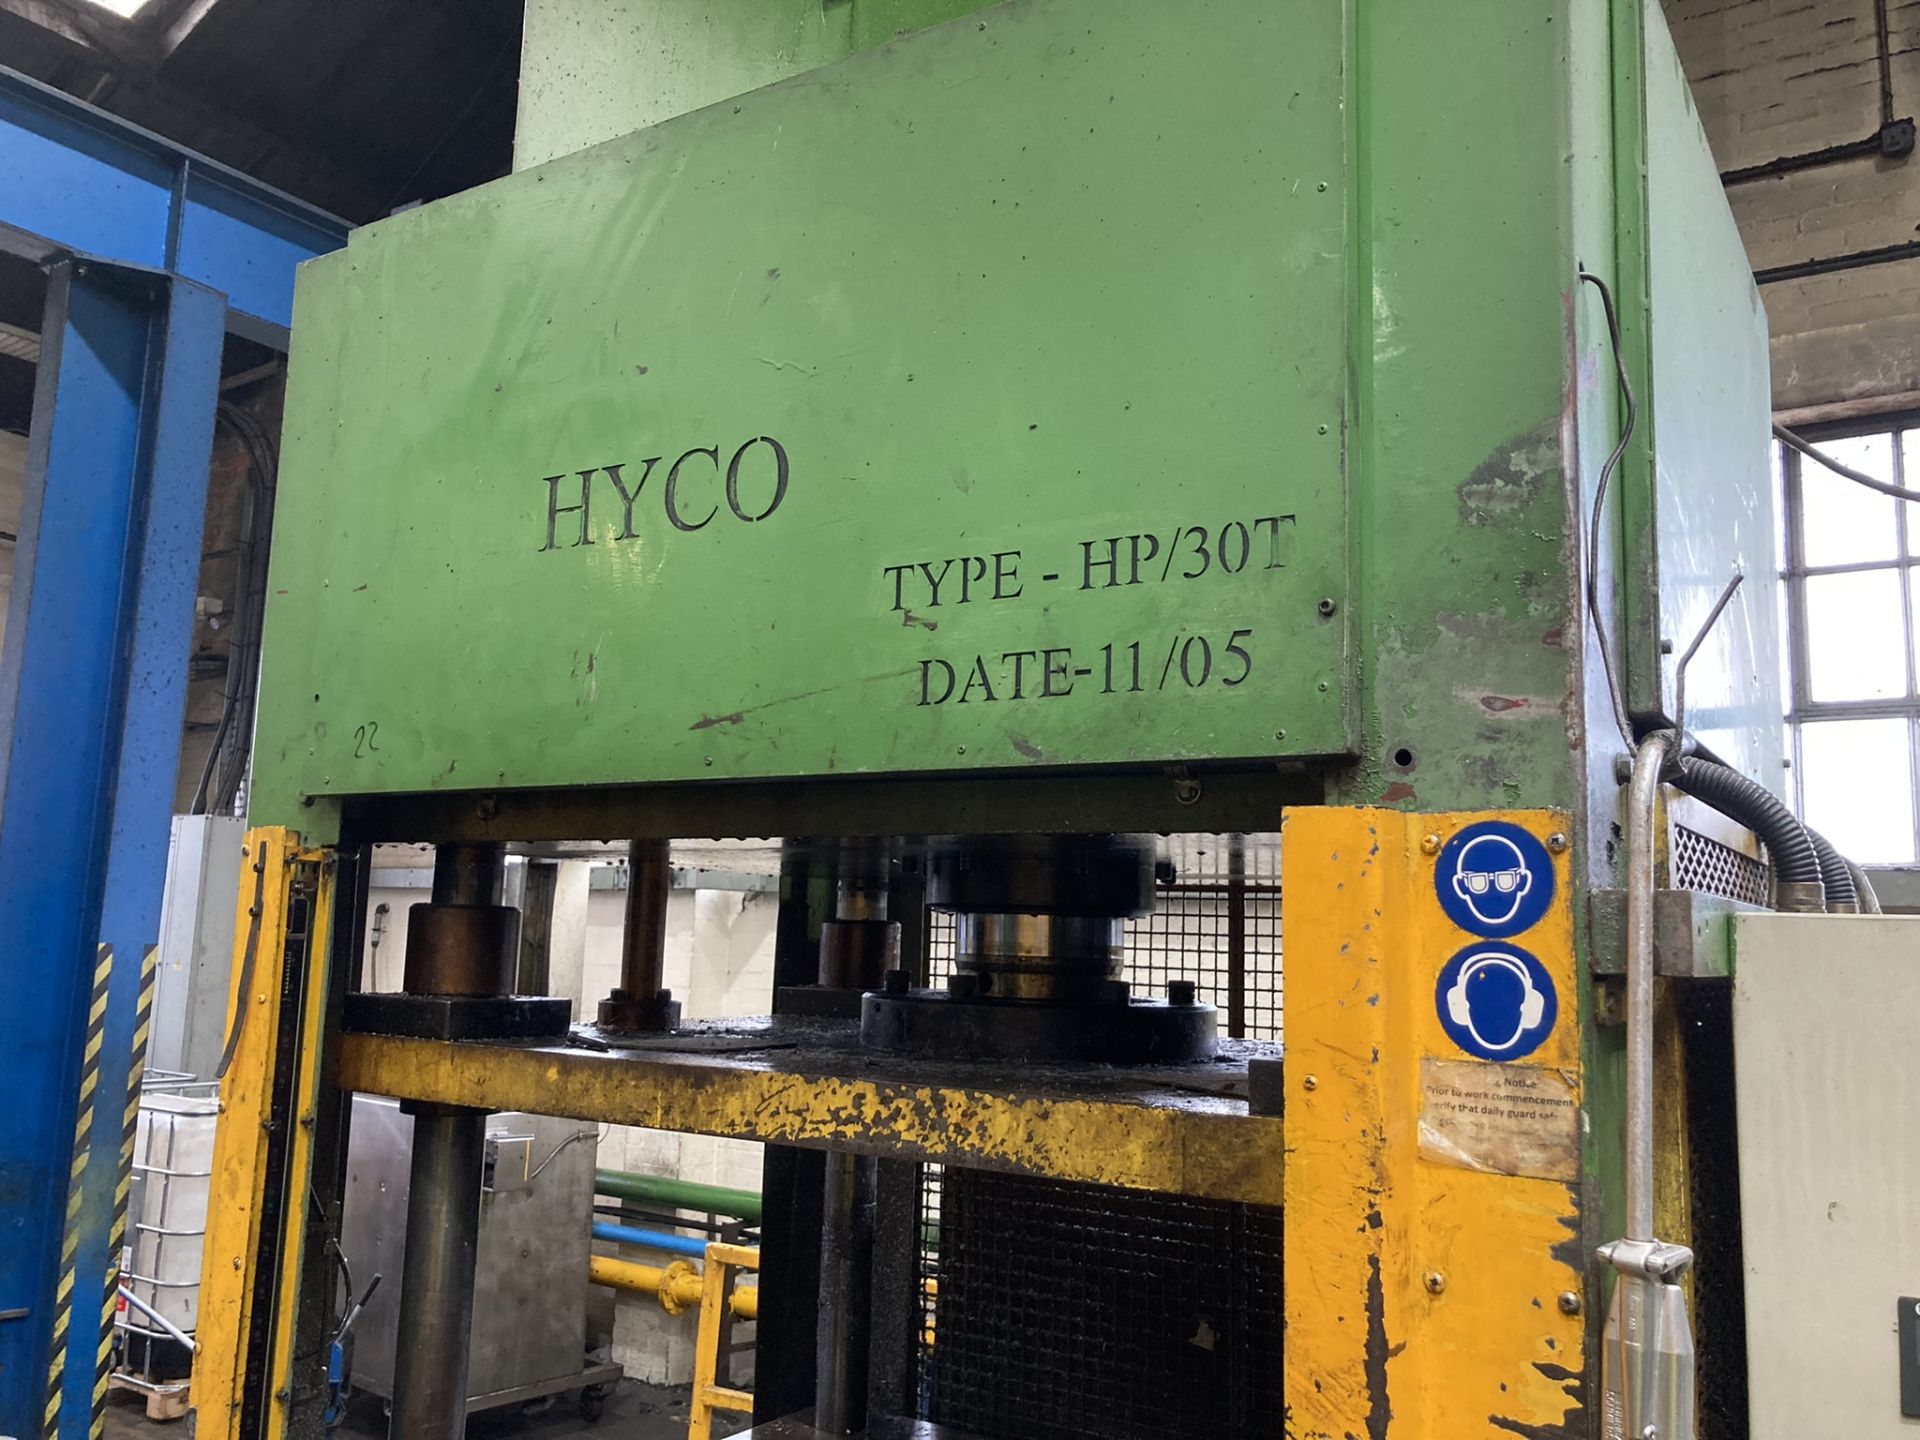 1 Hyco, HP/30T, 30 tonne rated capacity Trimming P